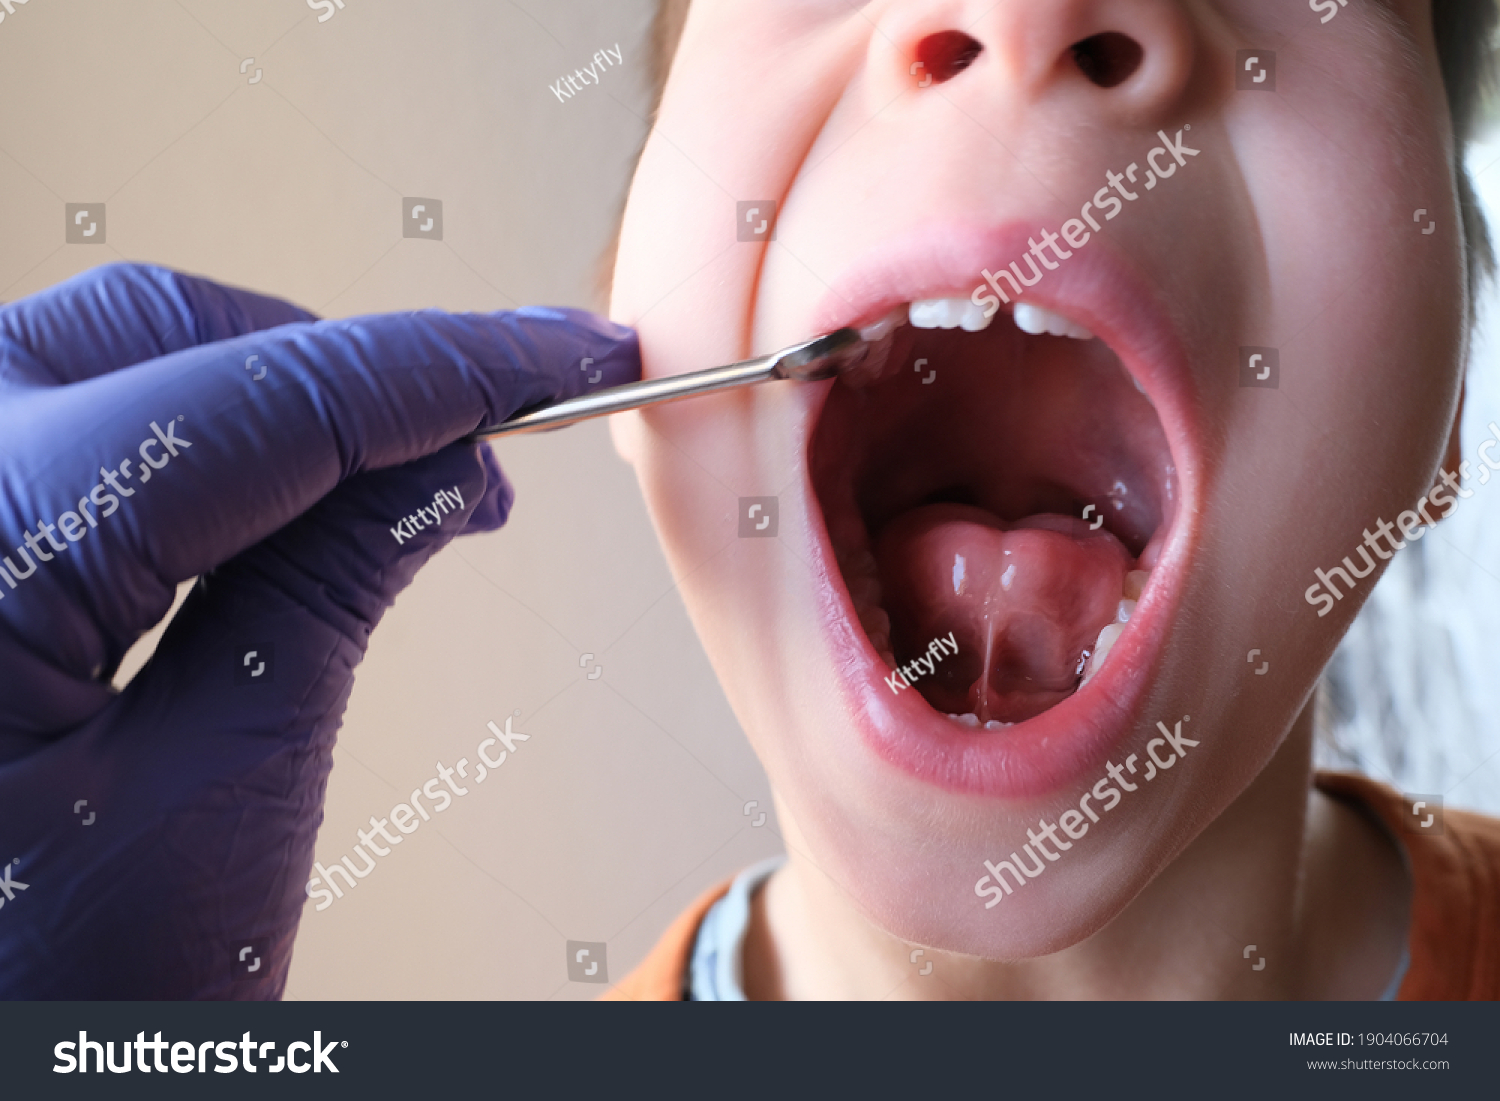 dentist, doctor examines oral cavity of small patient, length of frenum, boy, kid performs articulation exercises for mouth, concept of speech disorders, correction, selective focus on bridle of tongu #1904066704